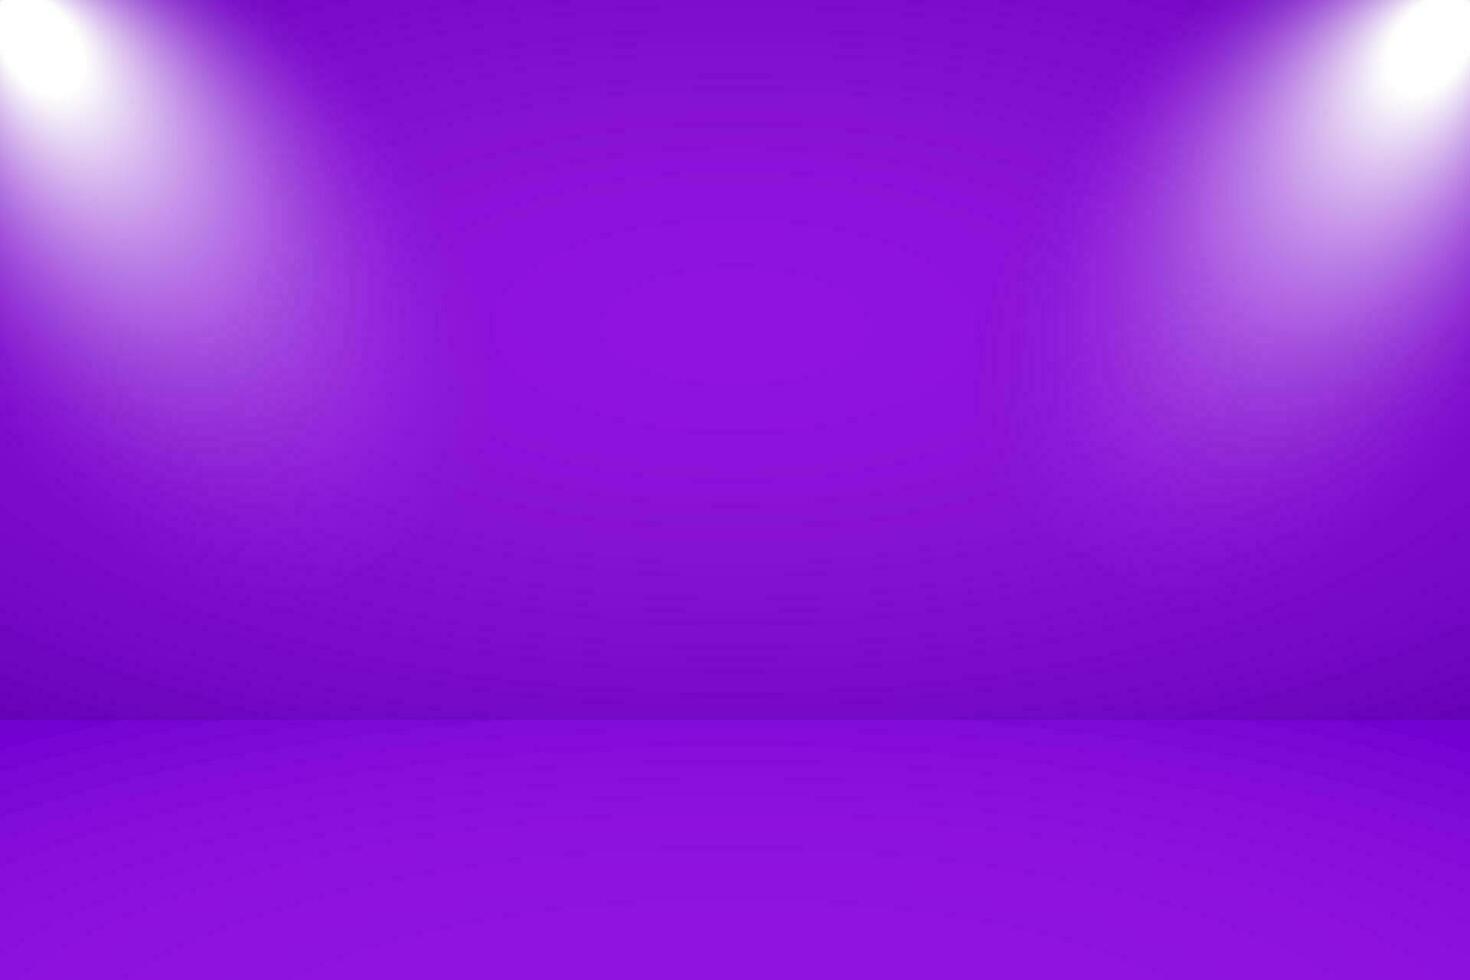 Vector illustration of empty studio with lighting and violet background for product display